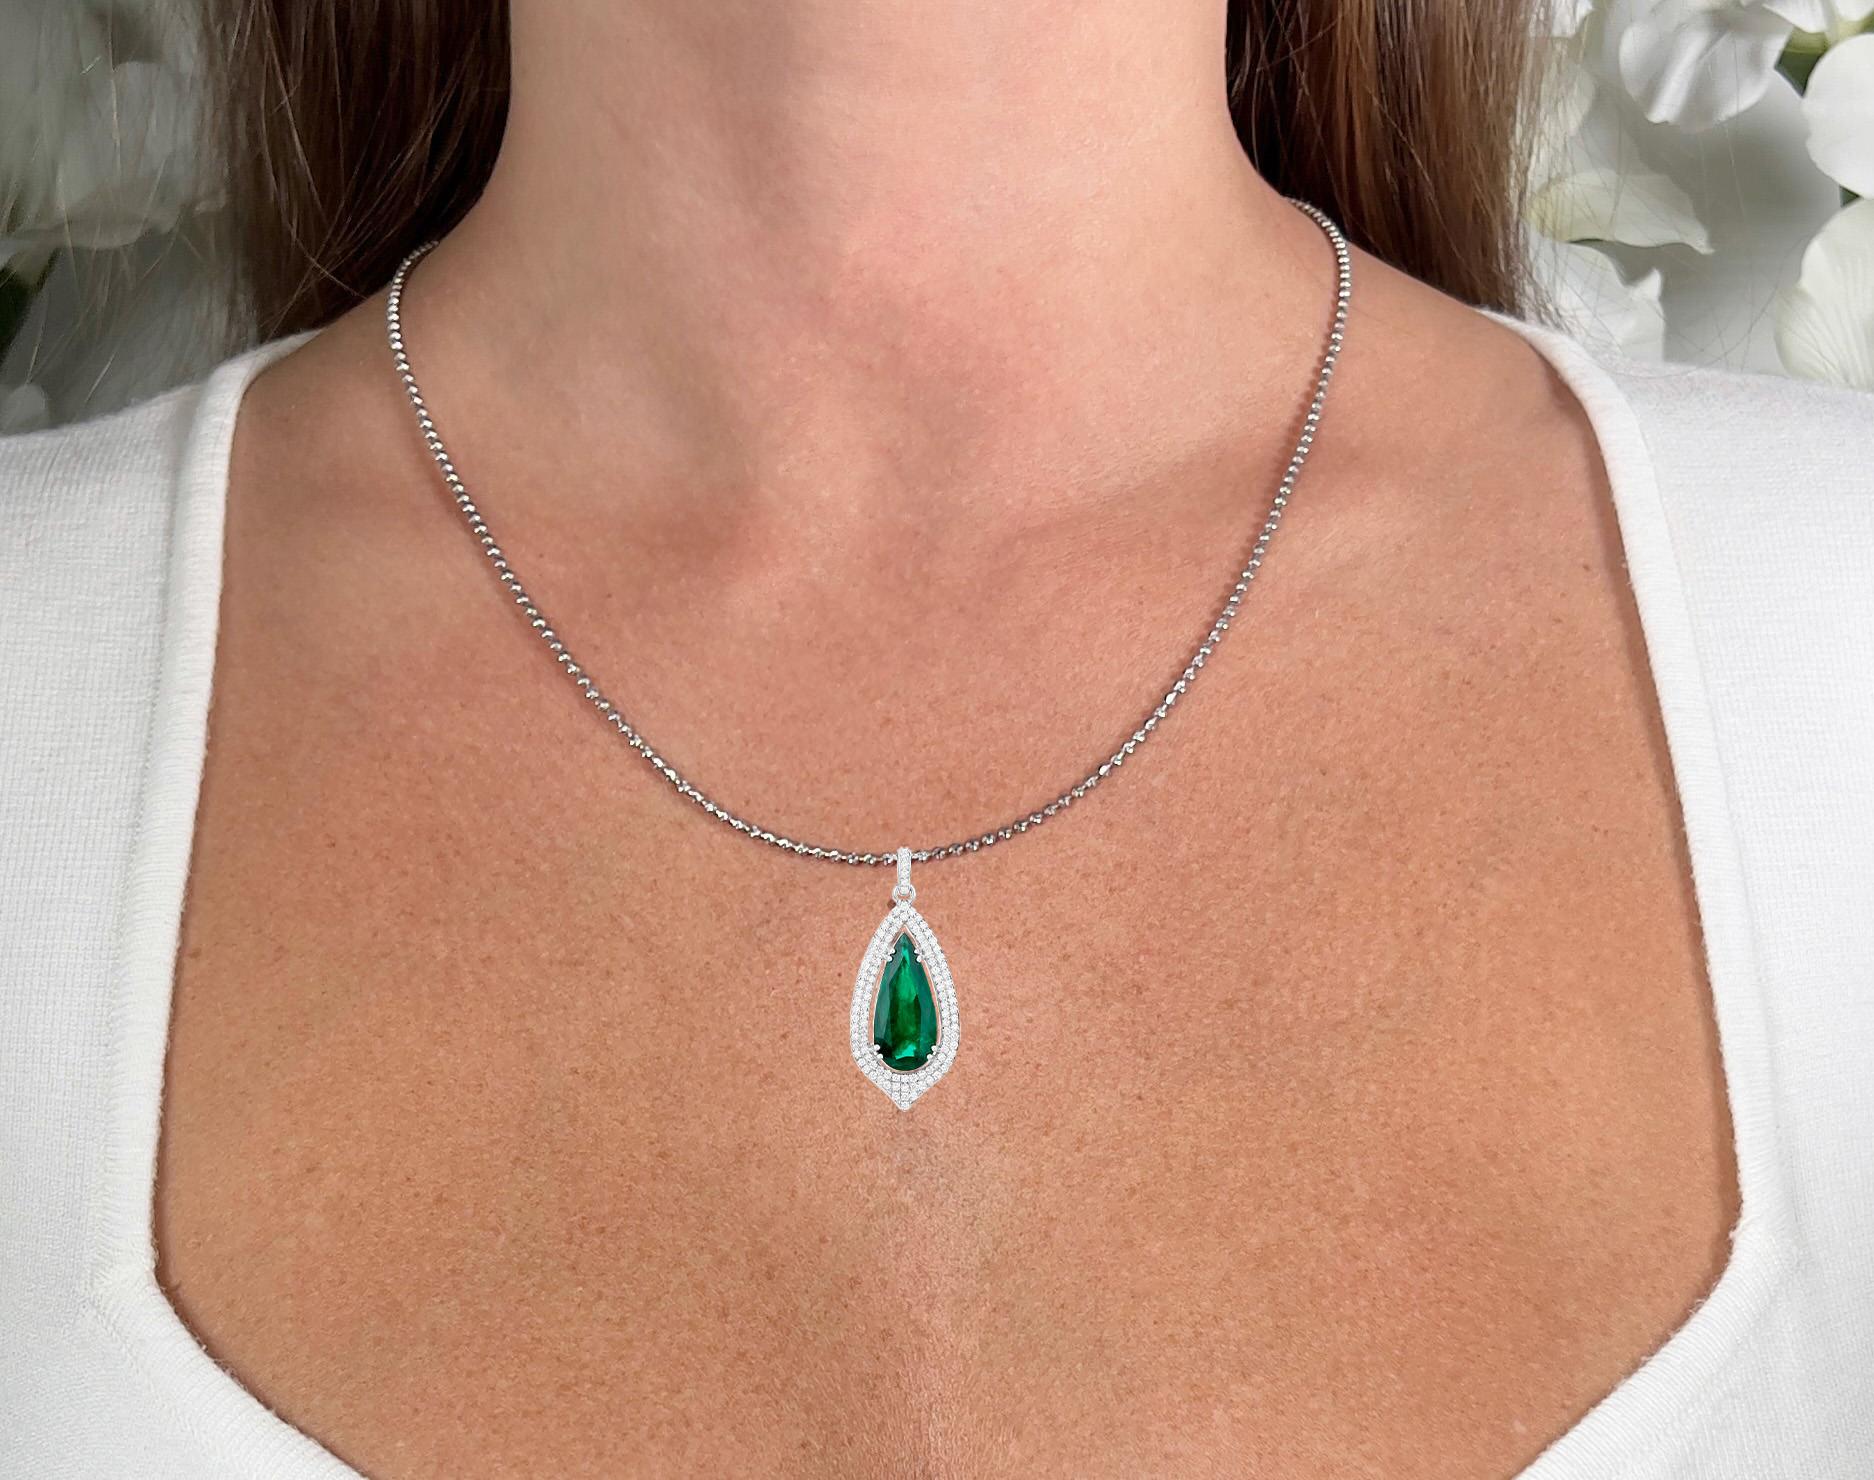 It comes with the IGI Certificate
All Gemstones are Natural
Pear Zambian Emerald = 4.69 Carat
104 Round Diamonds = 0.68 Carats
Metal: 14K White Gold
Pendant Dimensions: 35 x 15 mm

